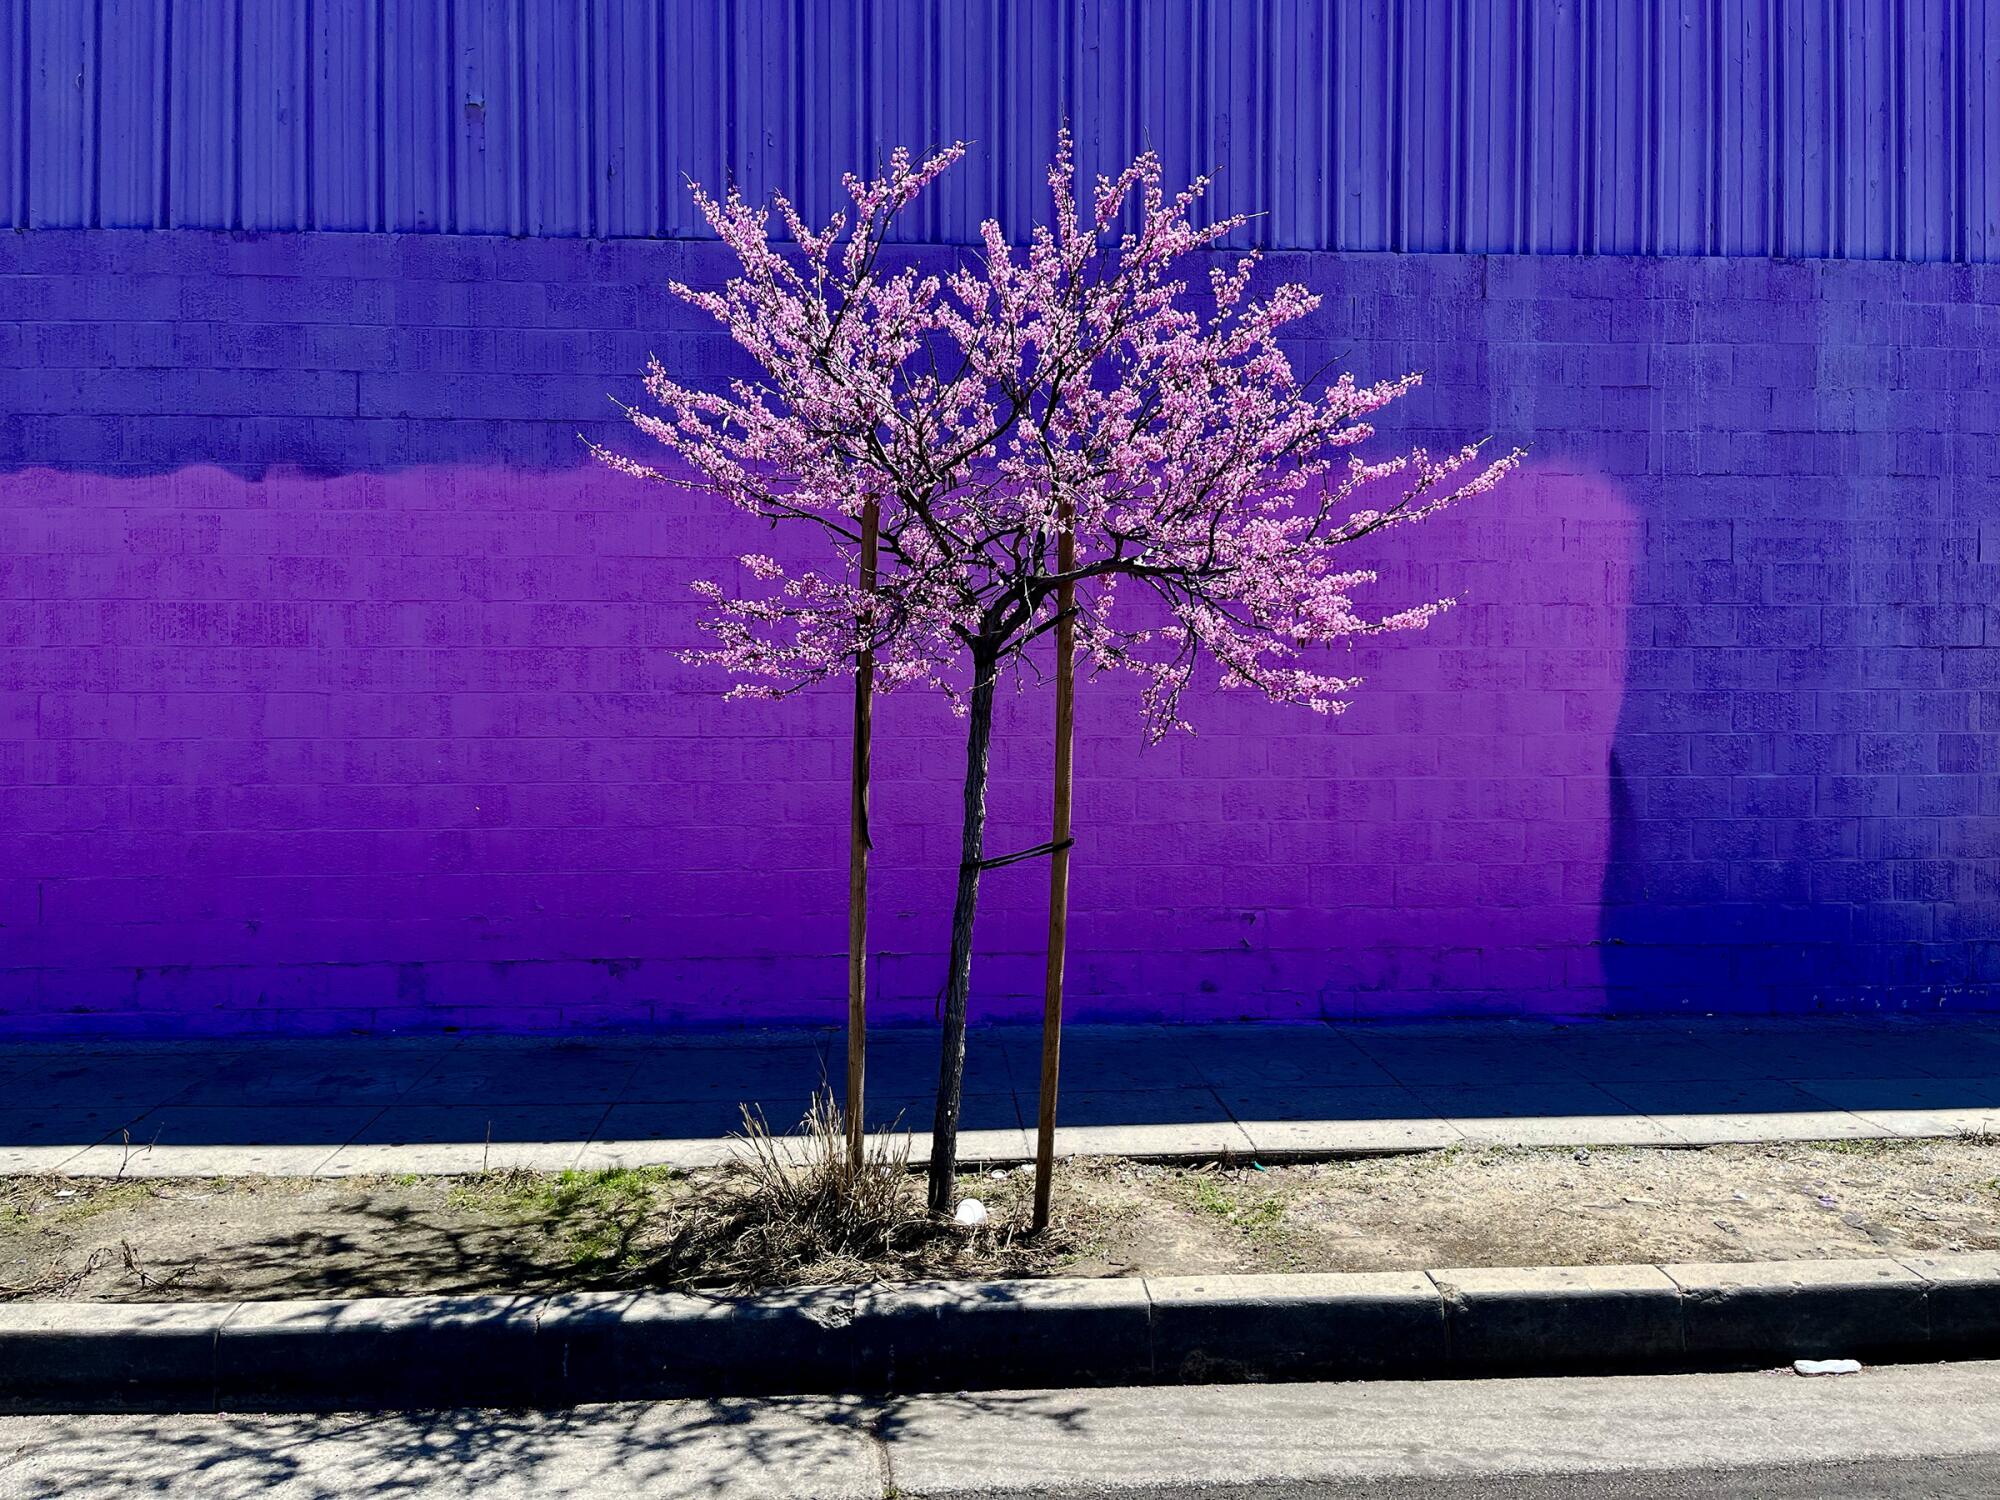 An Eastern redbud tree in front of a purple wall in South Los Angeles.